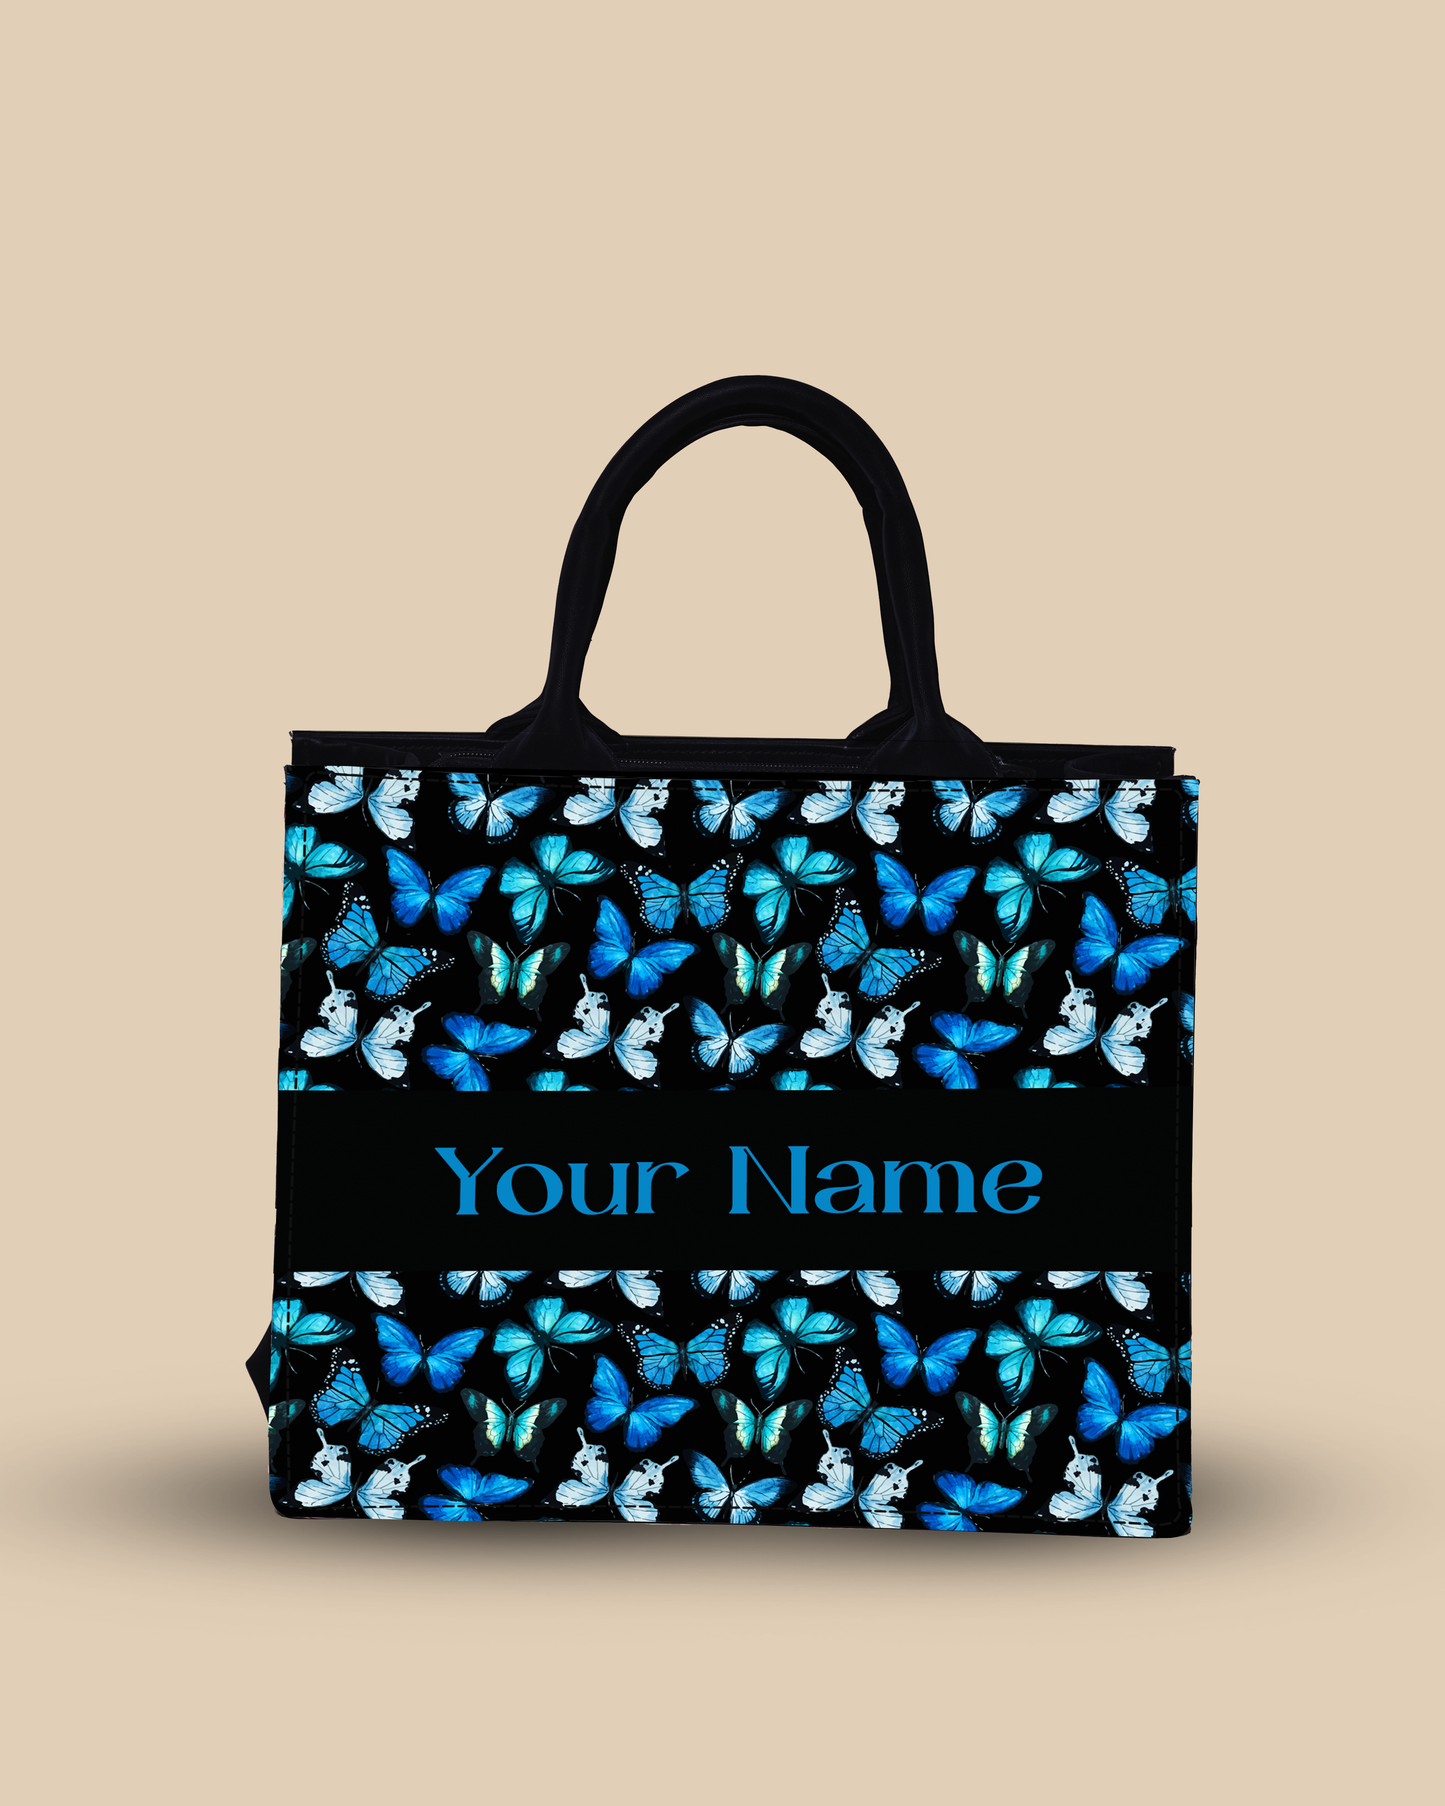 Customized small Tote Bag Designed With Blue Flying Butterflies